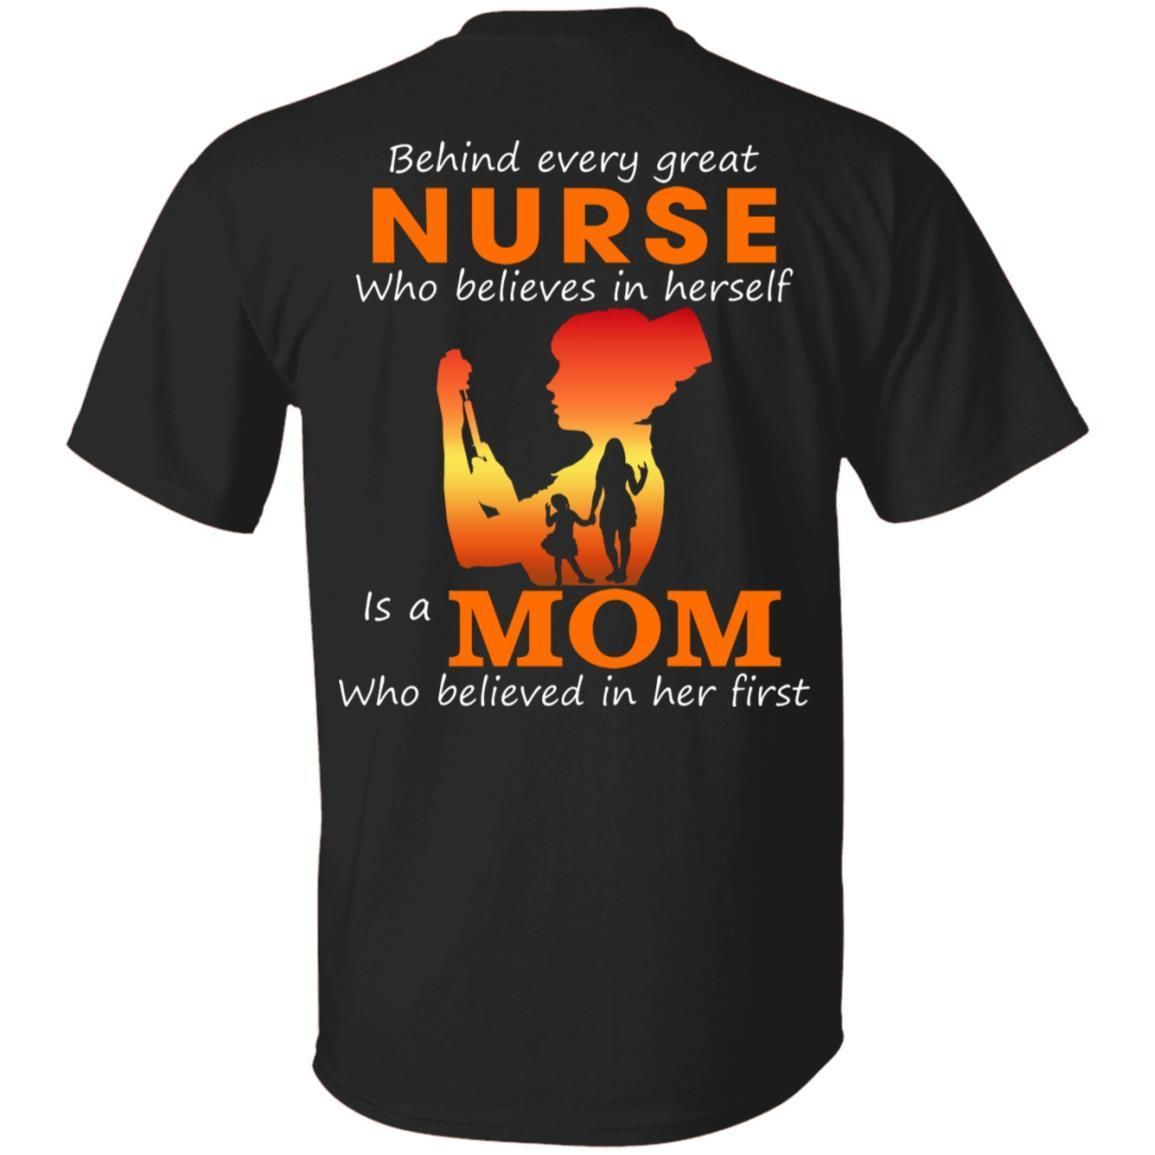 Behind every great nurse who believes in herself is a Mom shirts